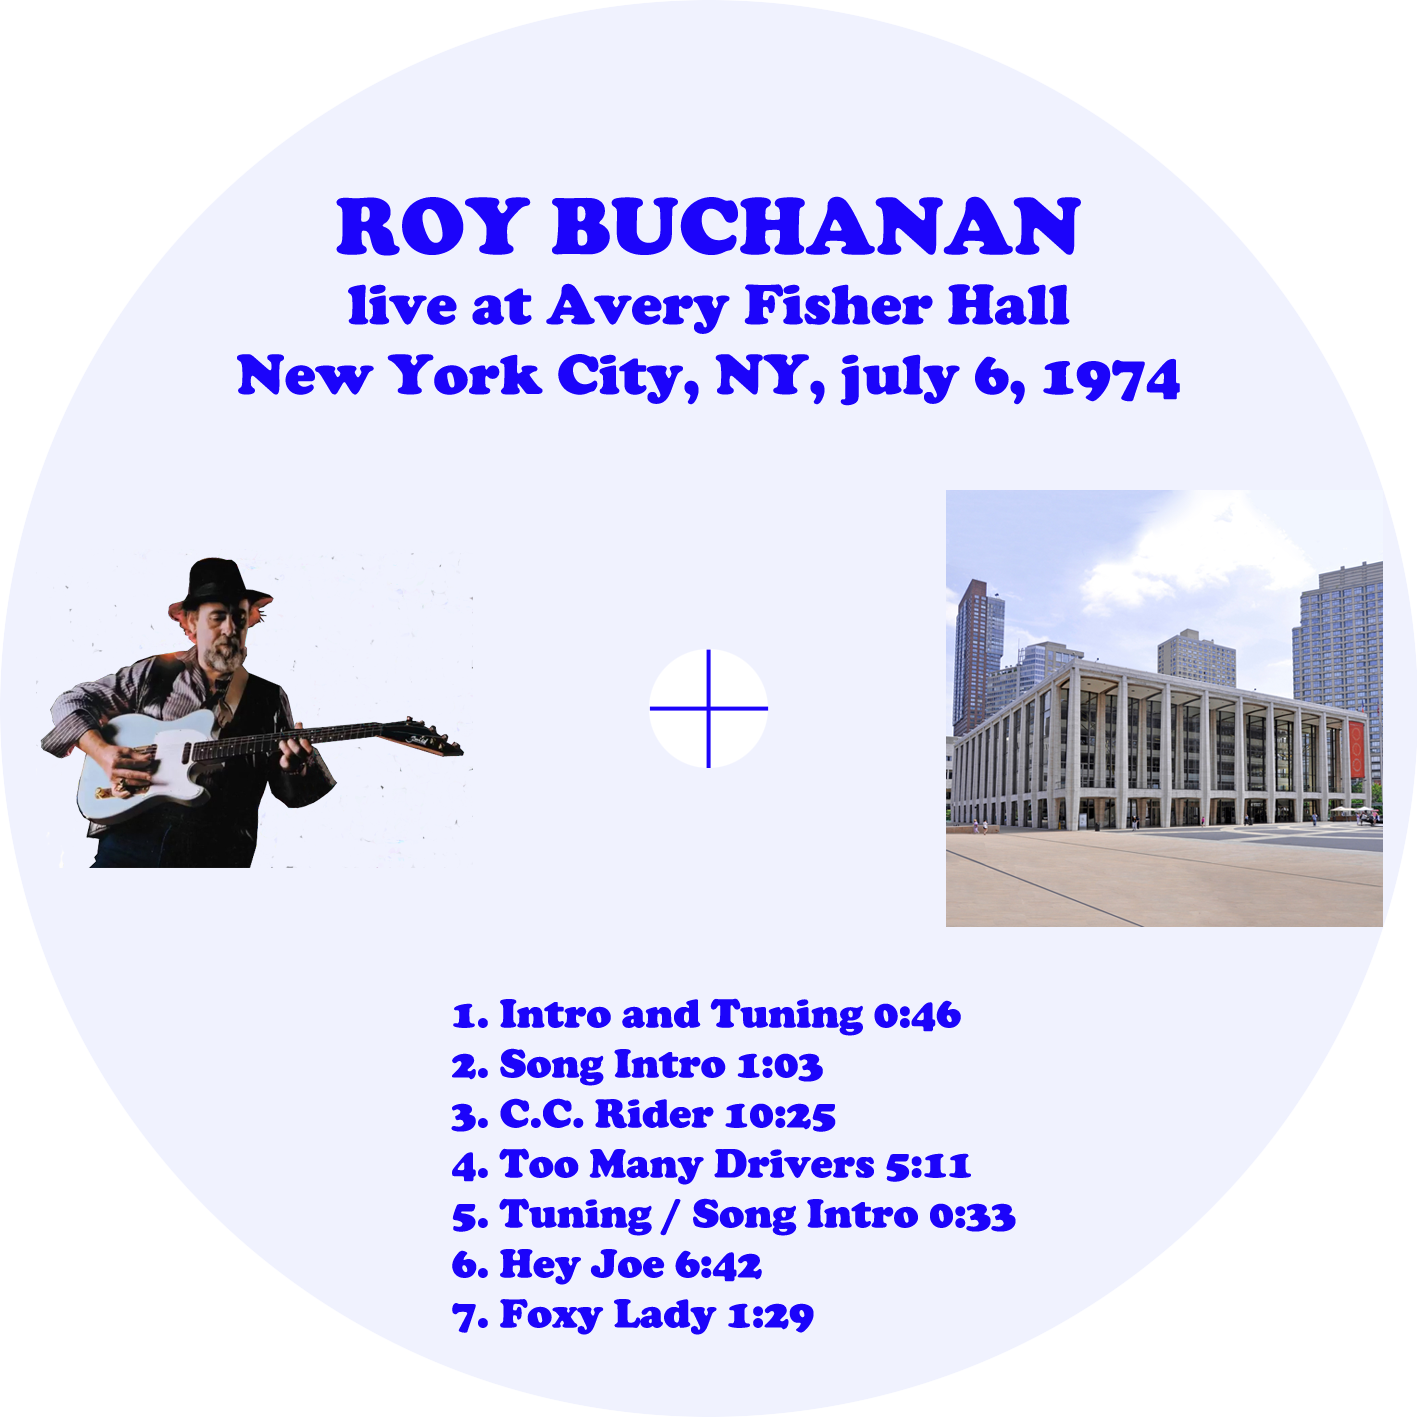 roy buchanan cdr live at avery fisher july 6, 1974 label